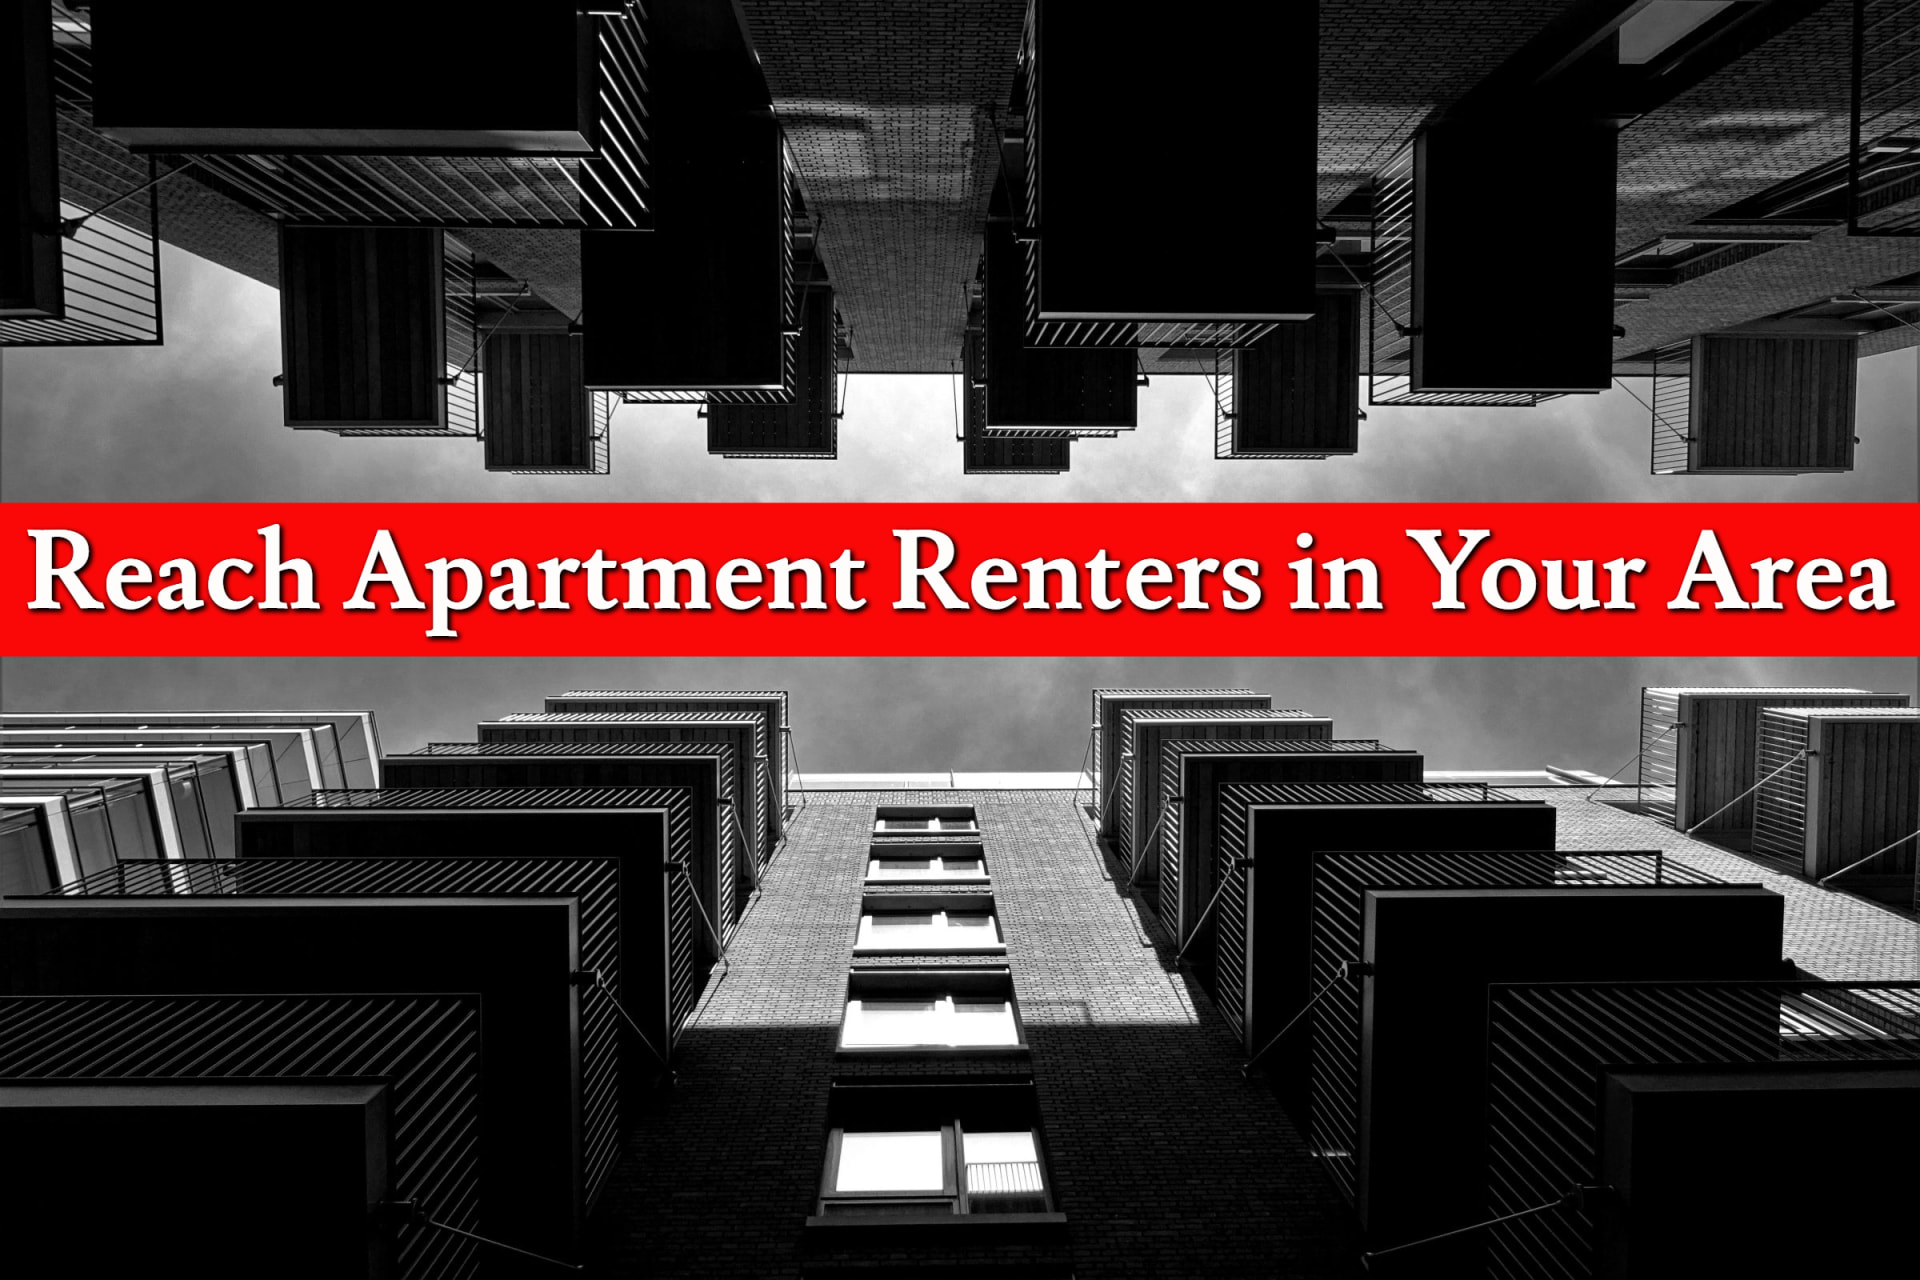 Find People Who Rent Apartments Around Your Business